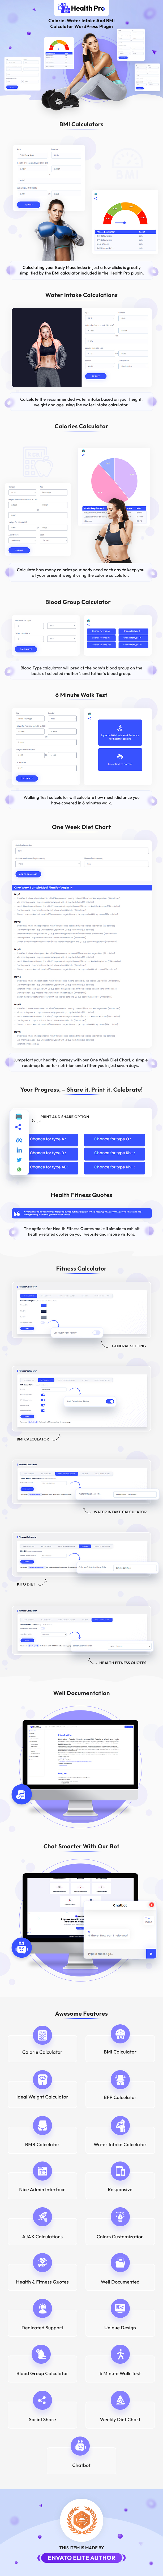 Health Pro - Calorie, Water Intake, BMI Calculator with Chatbot Assistant WordPress Plugin - 2